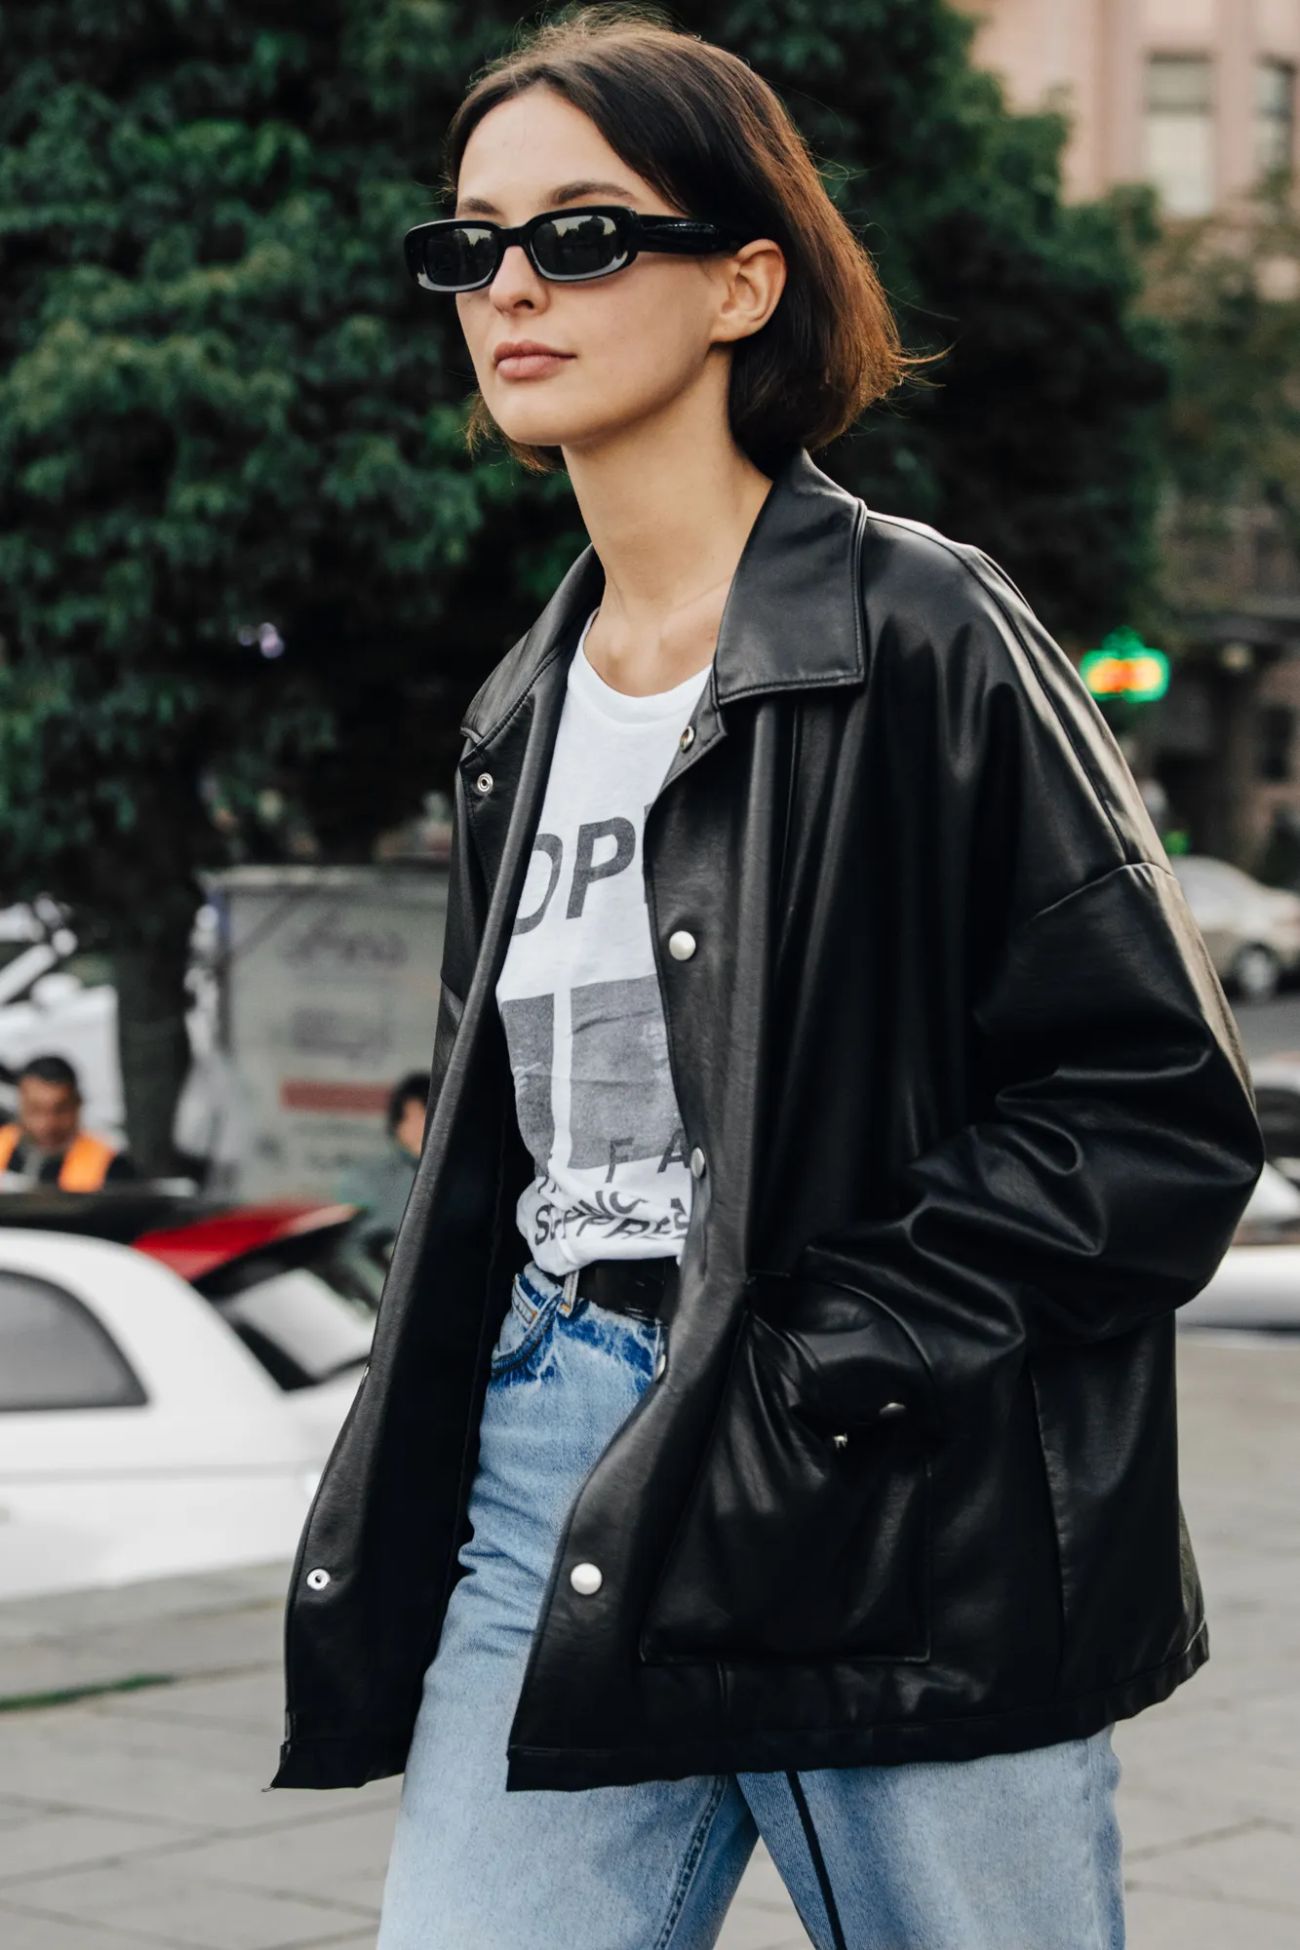 Casual Mid-Season Outfits: 90s Inspired Black Leather Jacket, Blue Jeans, White Printed T-Shirt Outfit